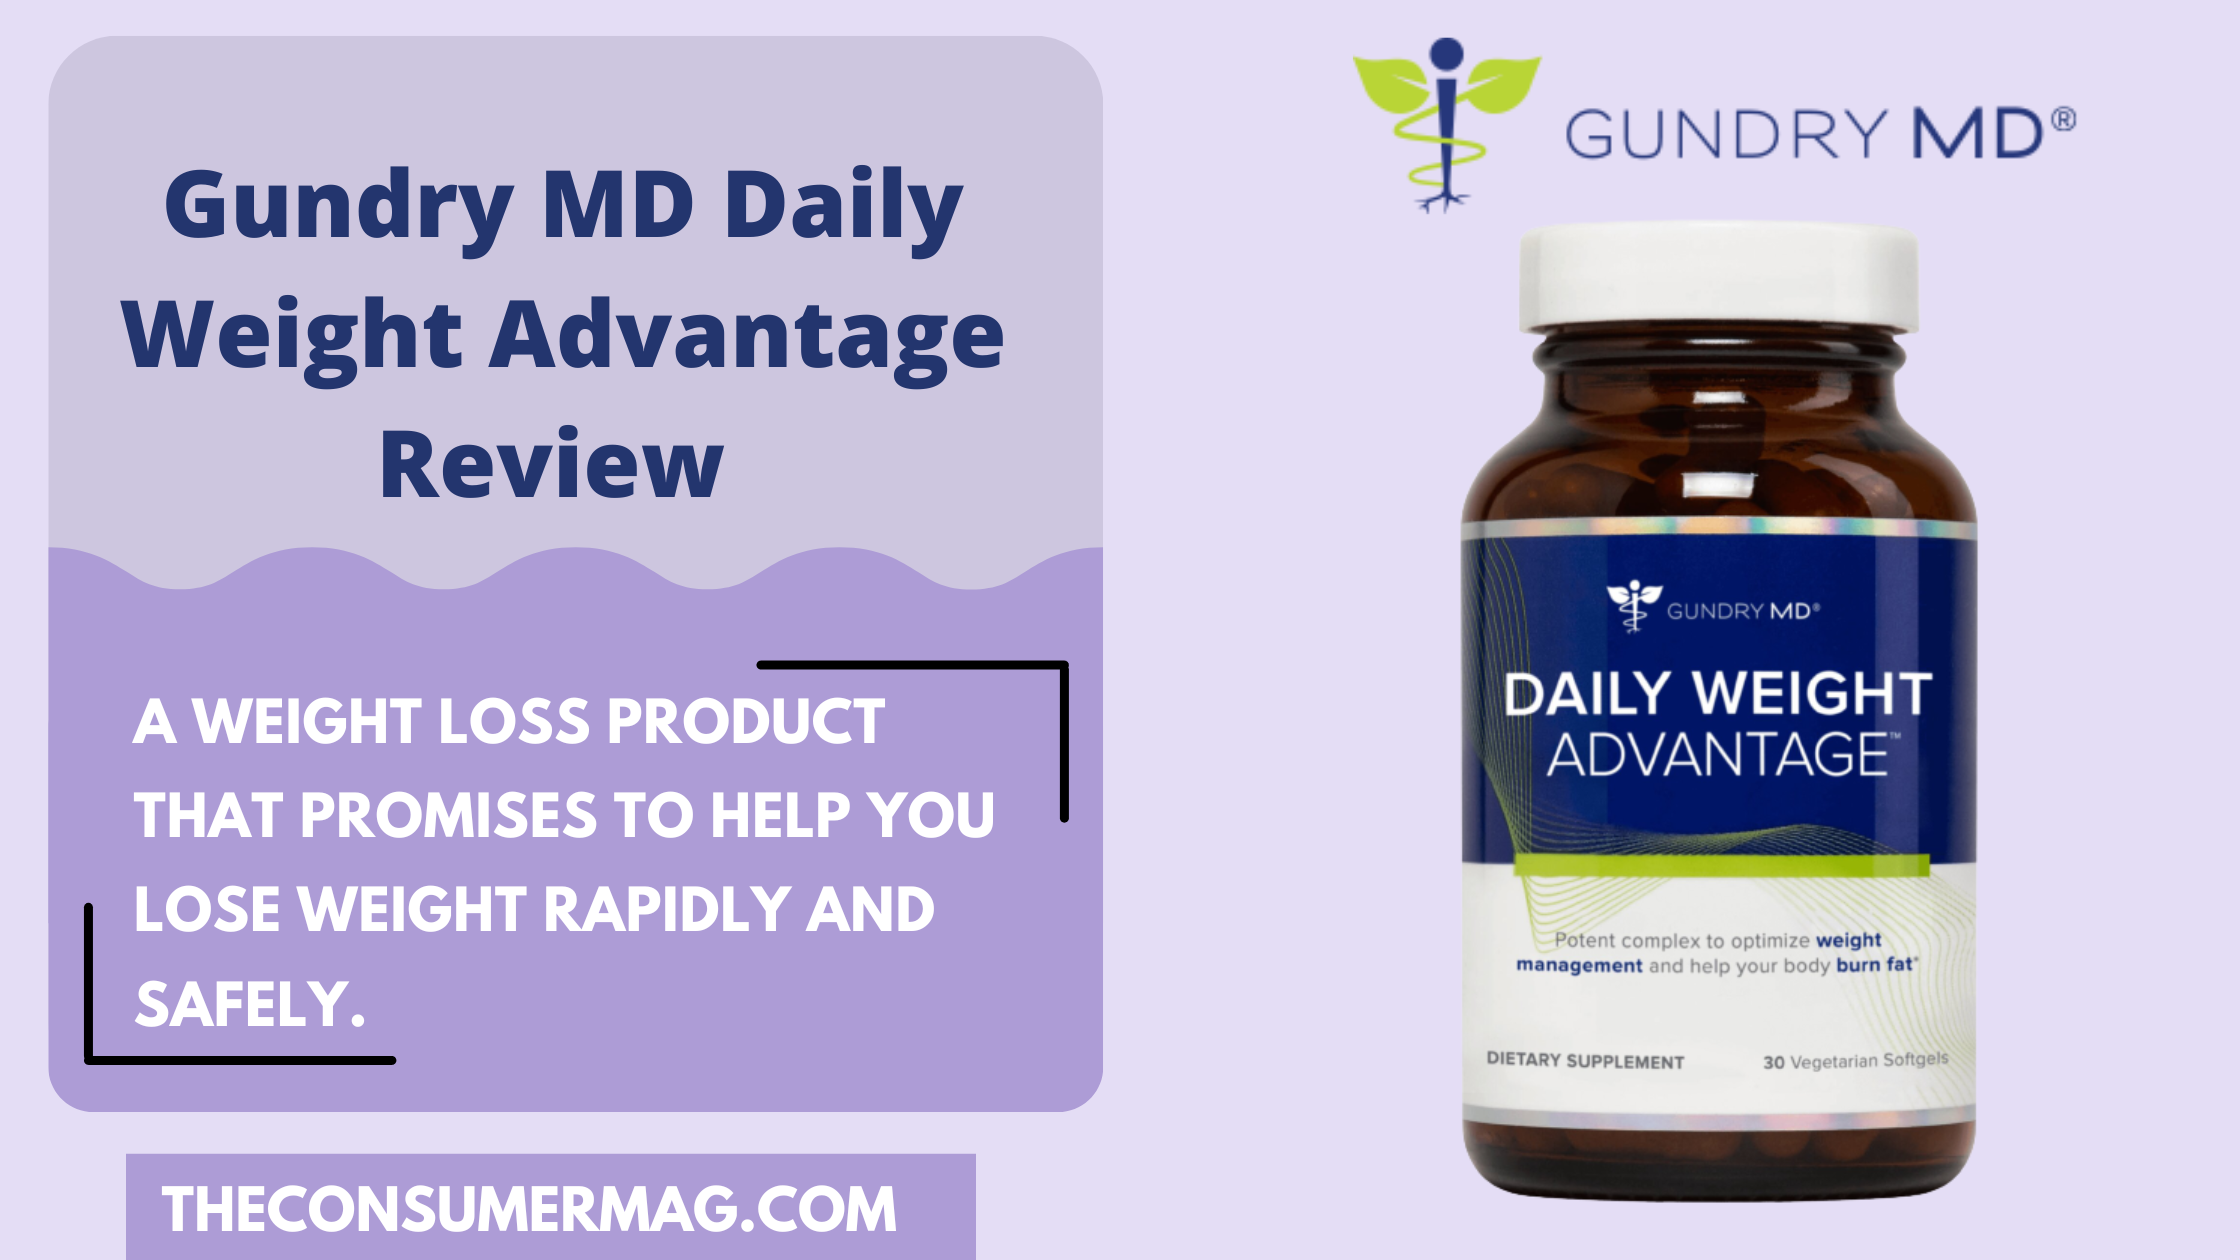 Daily Weight Advantage featured image